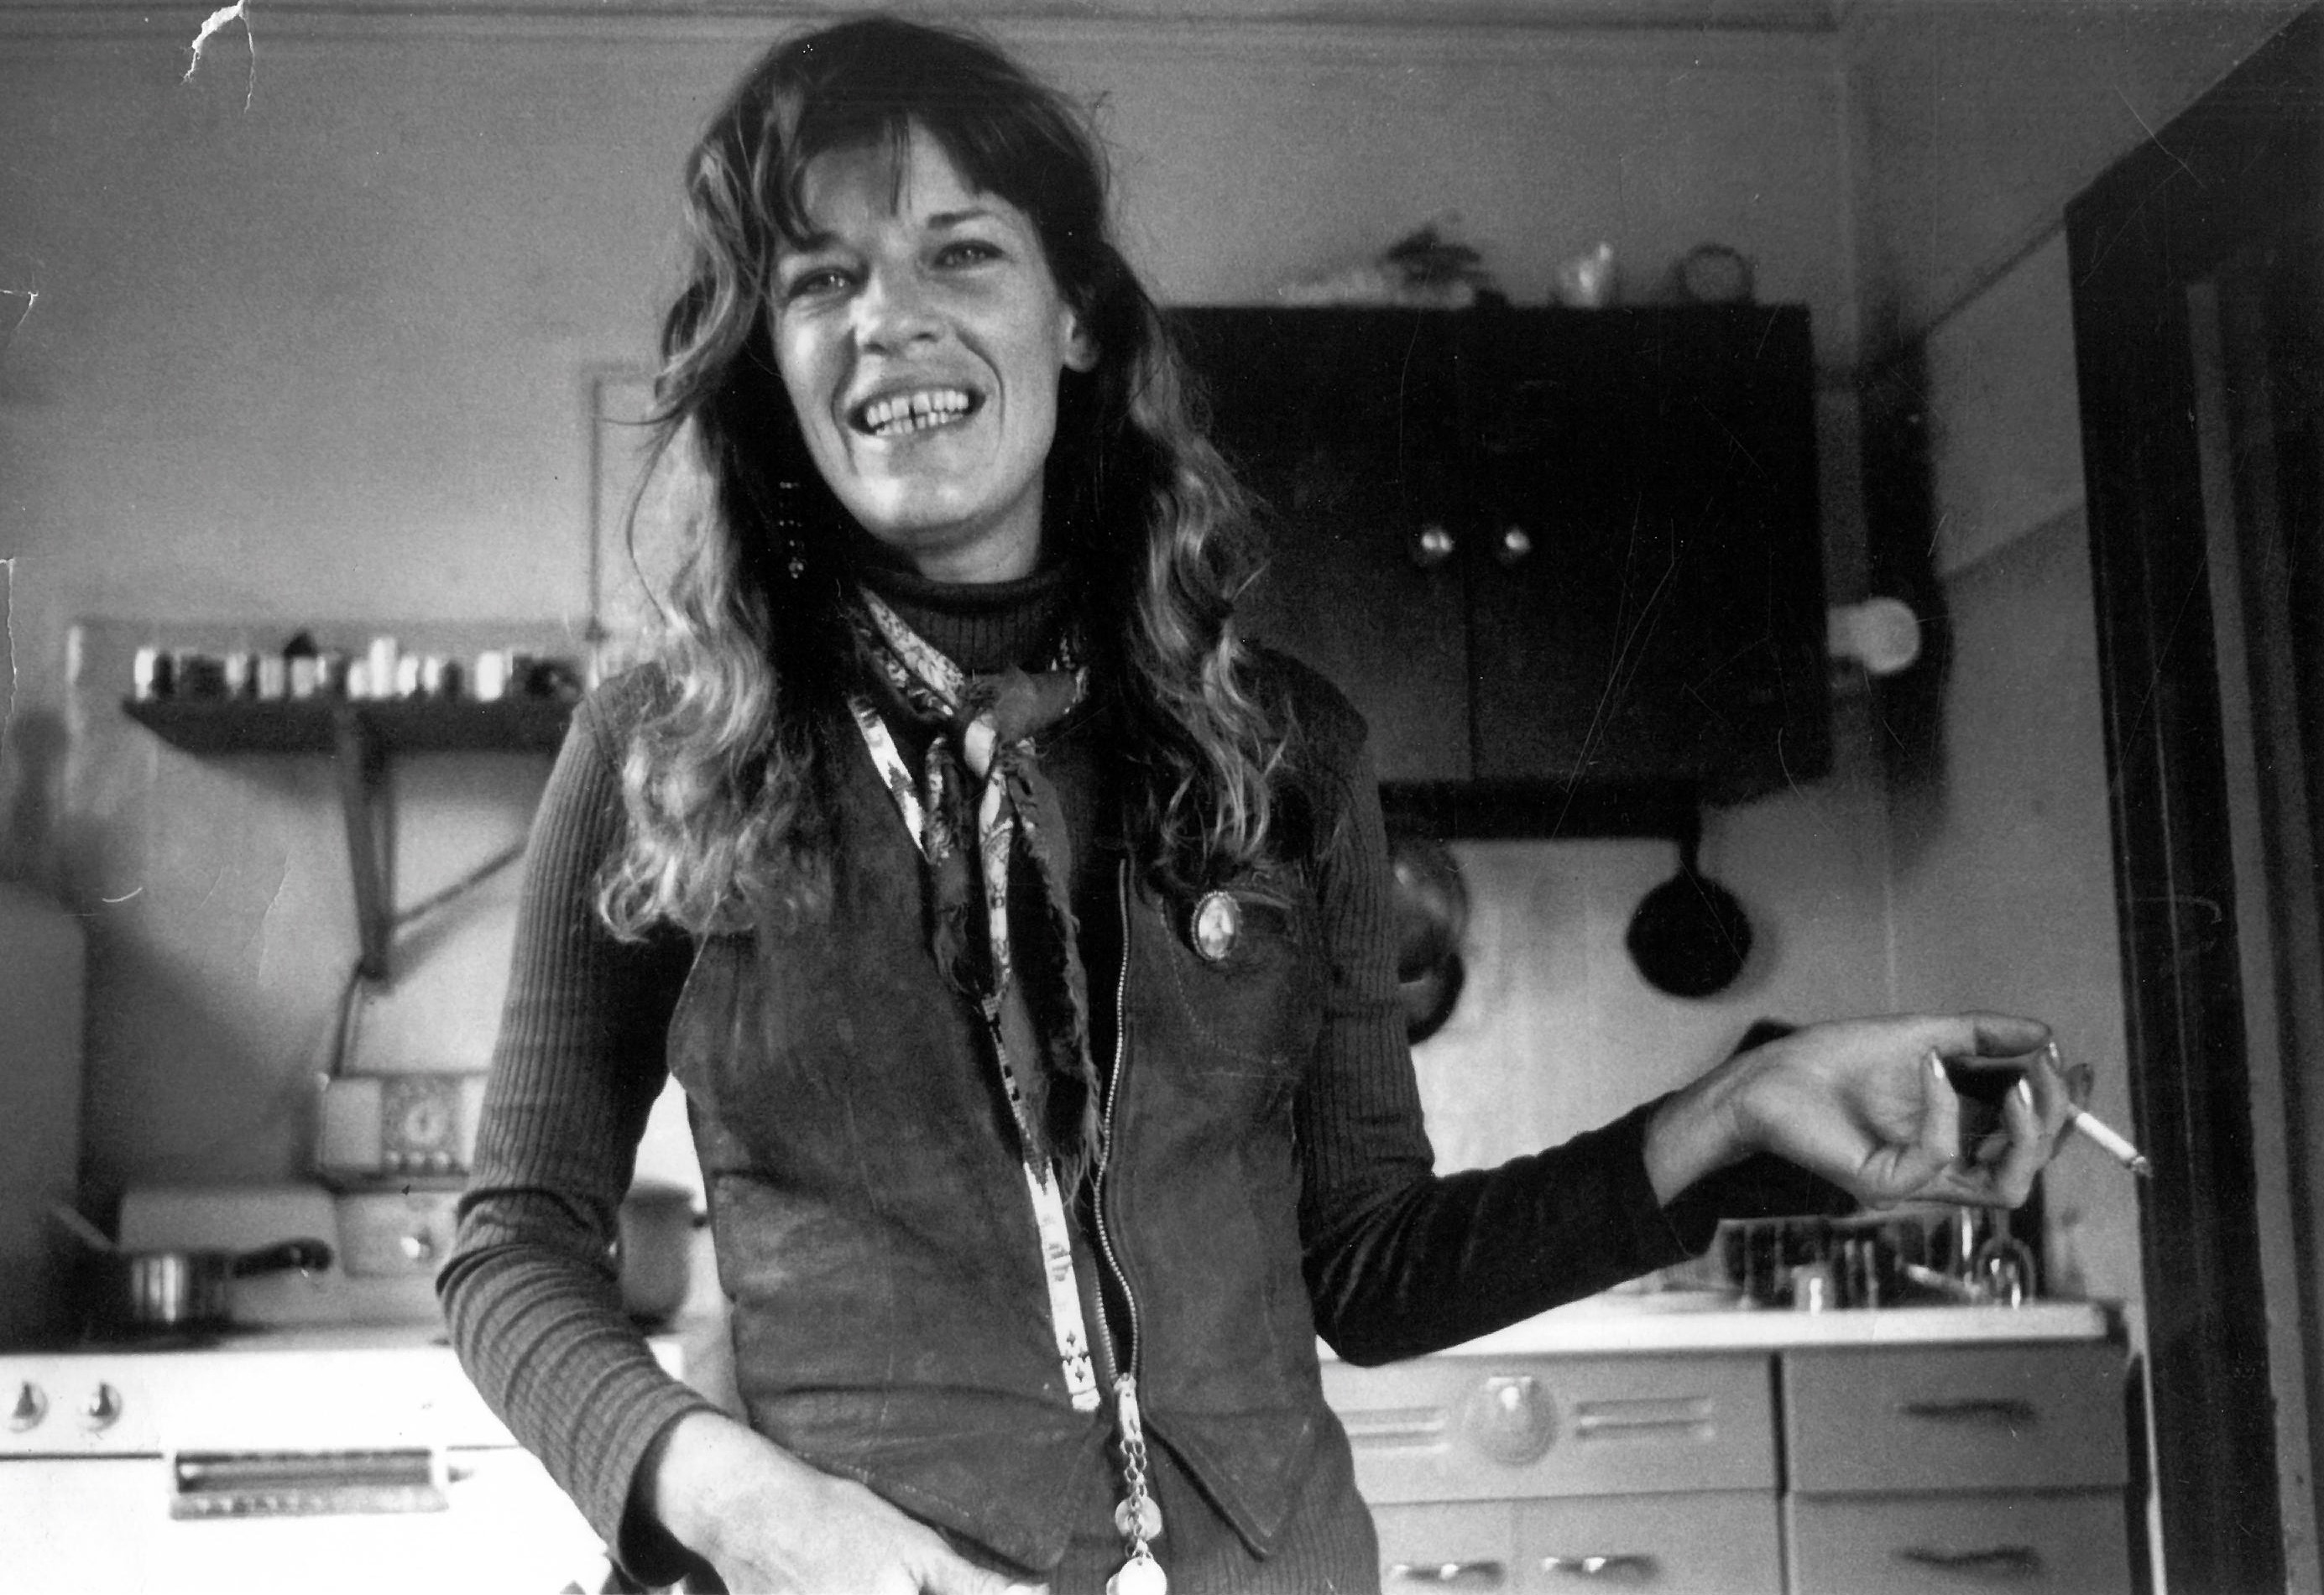 Marjorie Sharp, Portland poet and notorious wild woman in 1970s, tried to make life an art form